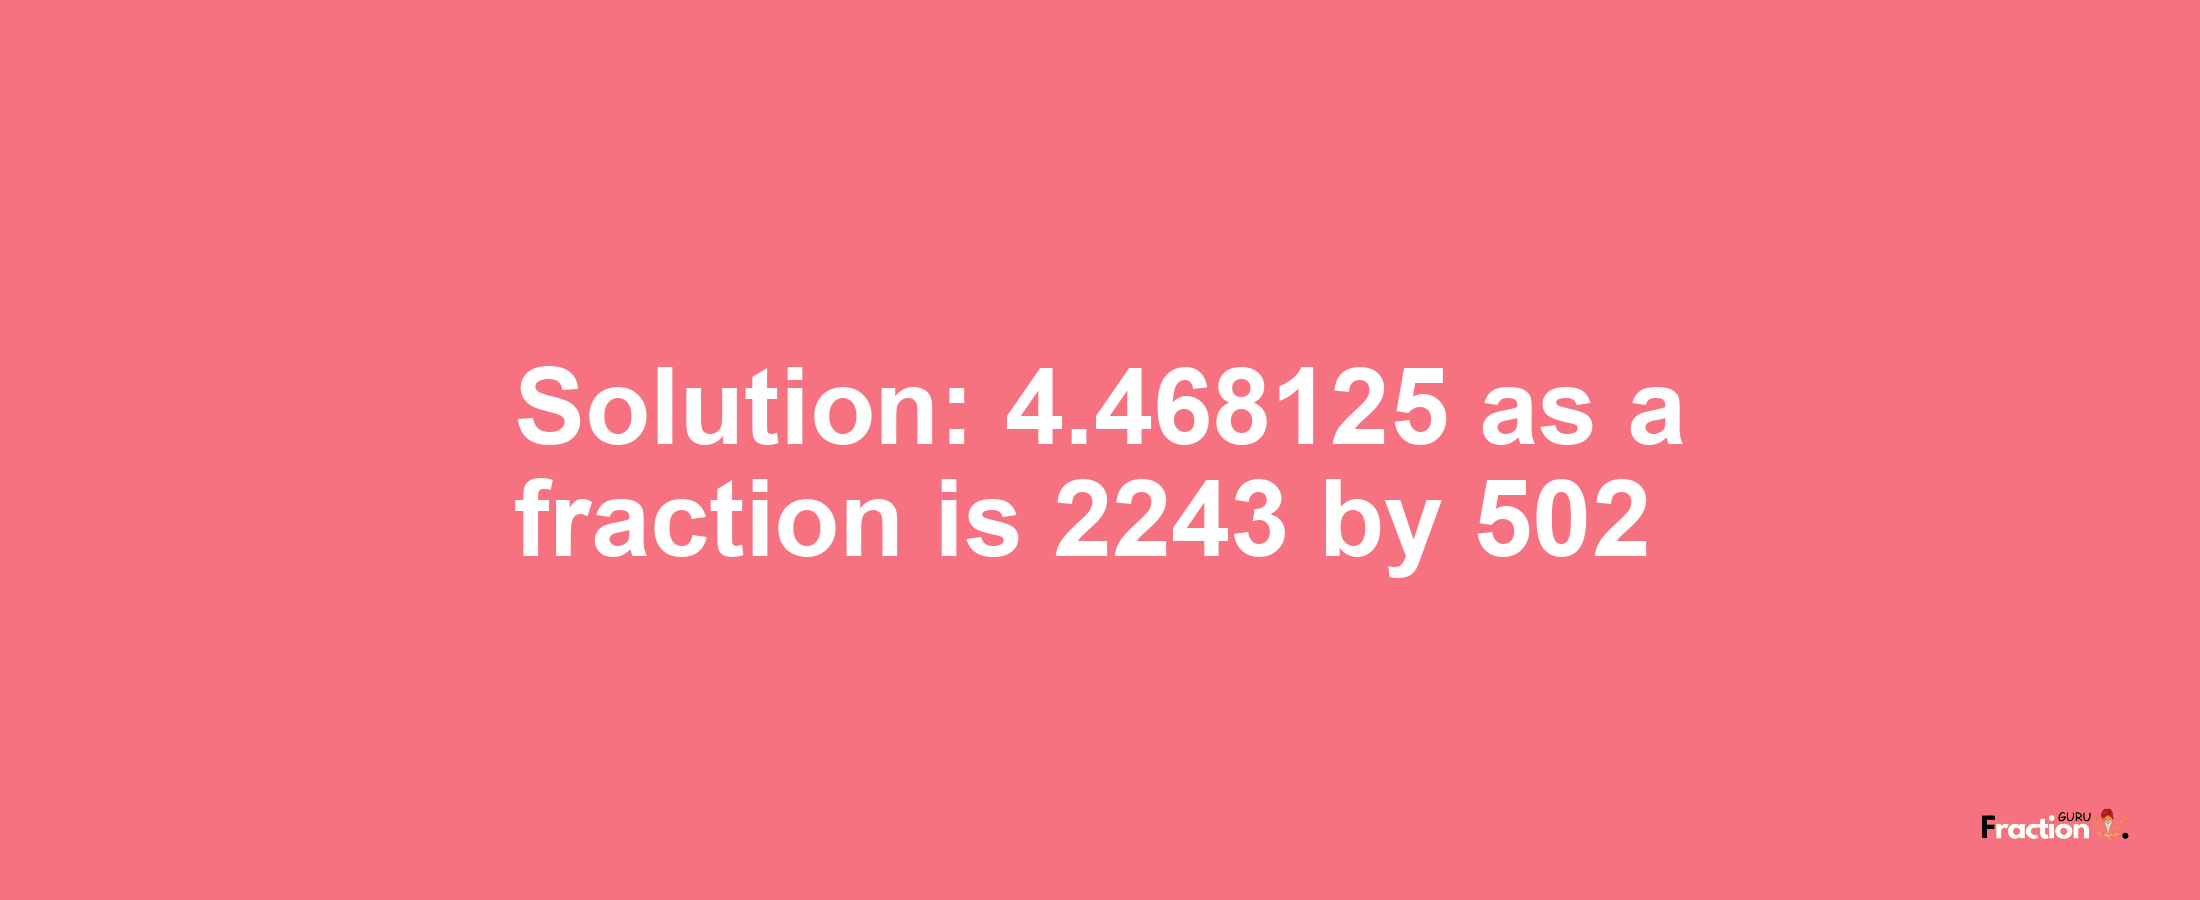 Solution:4.468125 as a fraction is 2243/502